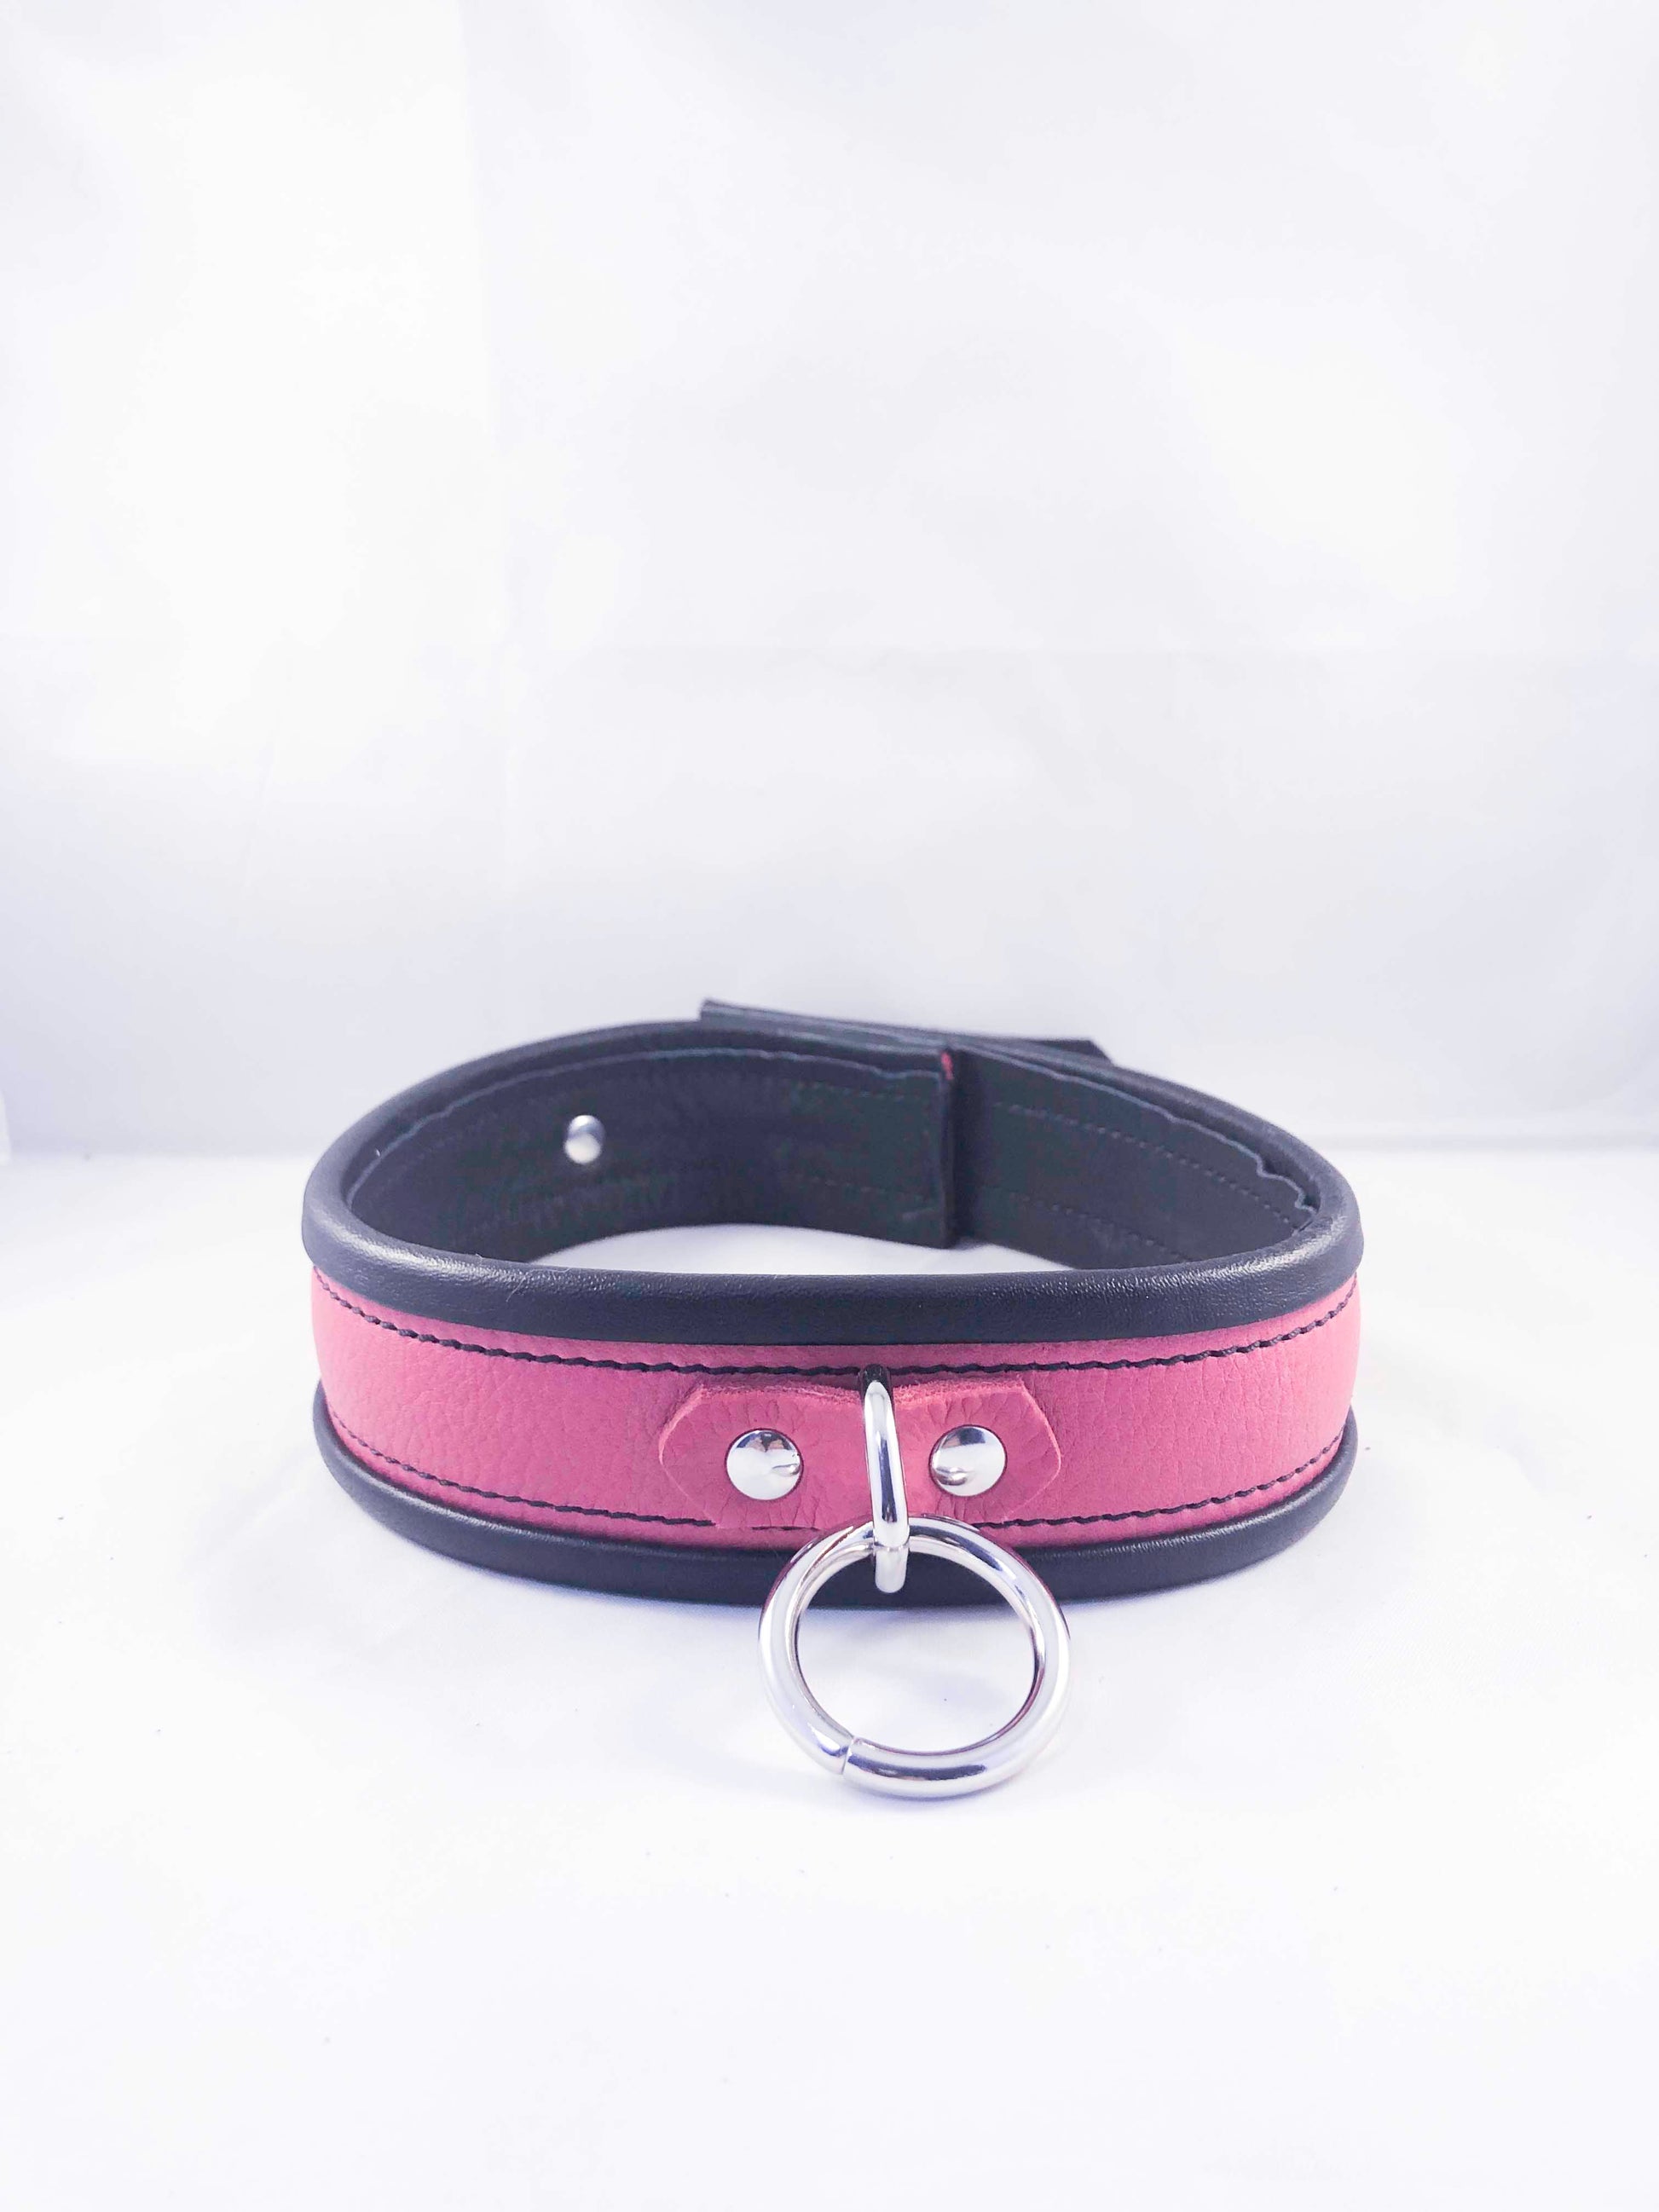 Pink collar, front.